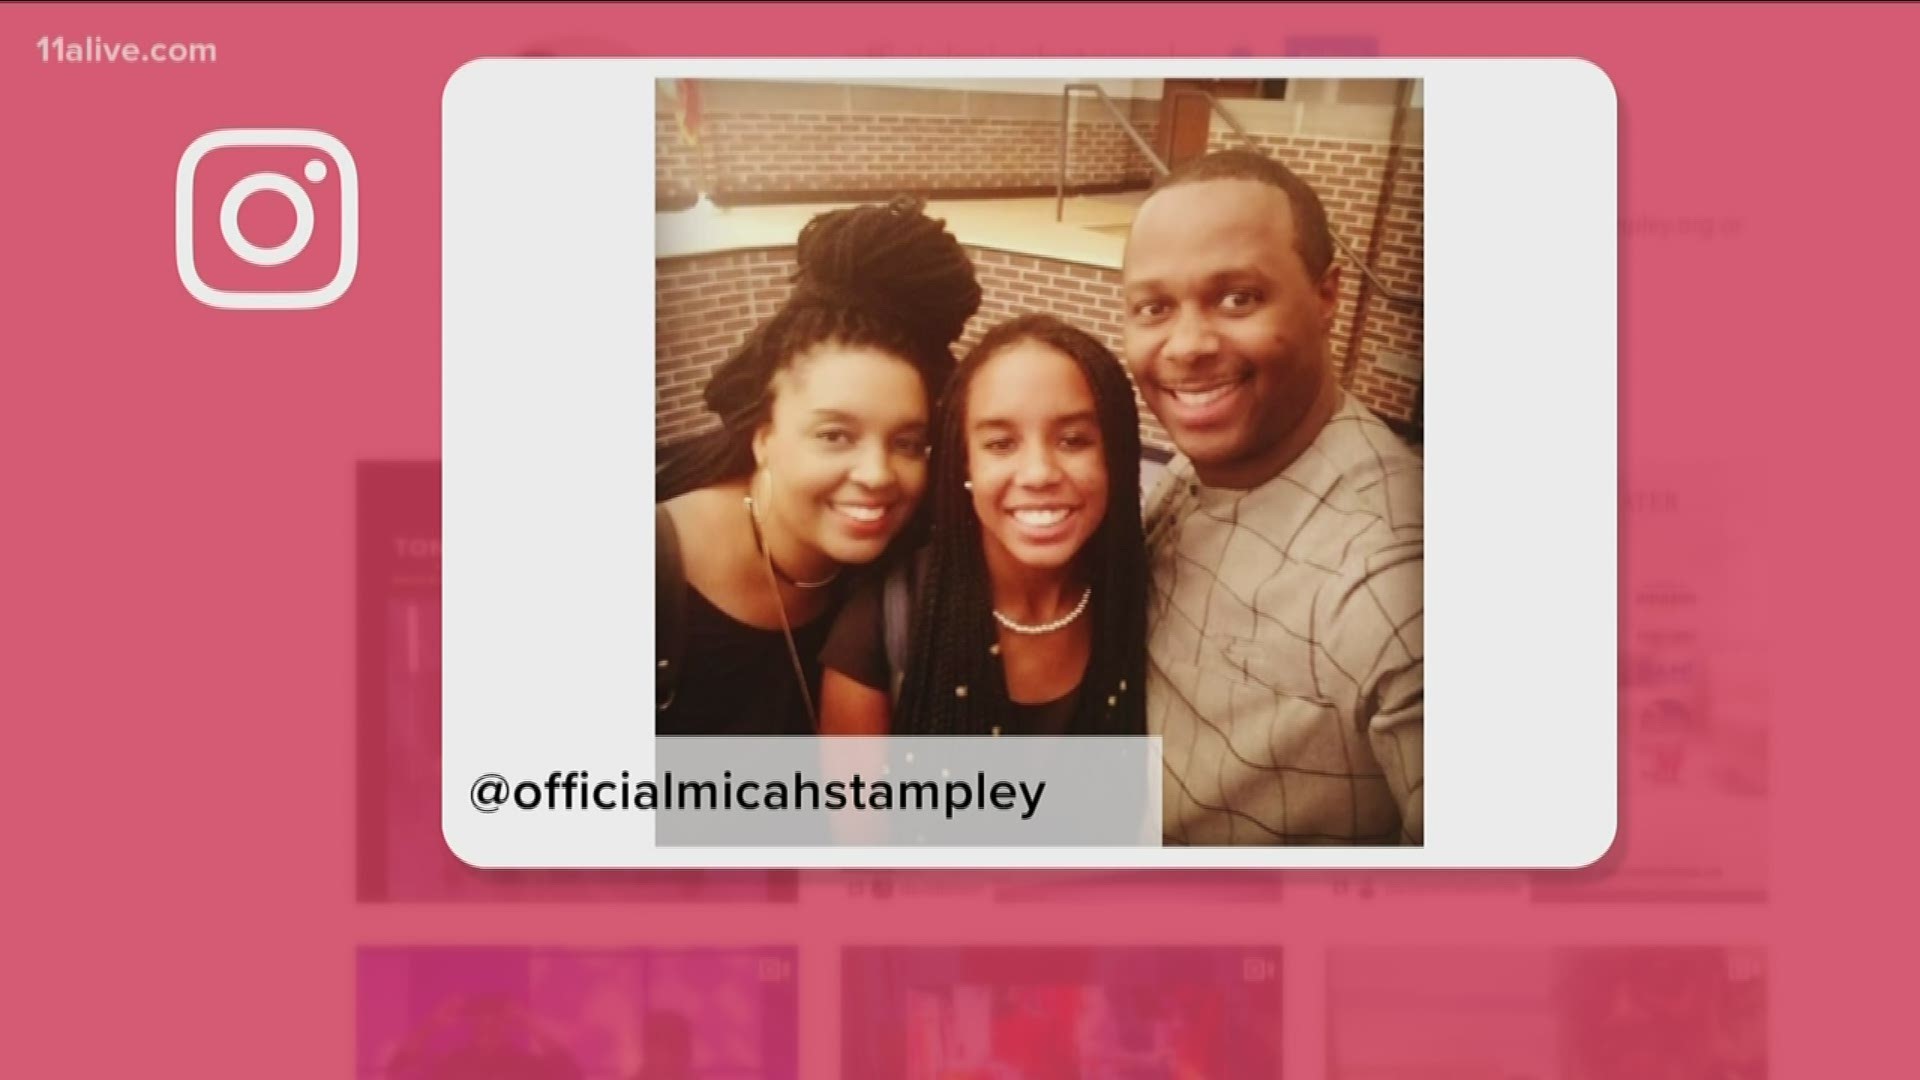 The daughter of gospel singer Micah Stampley has passed away at just 15 years old.